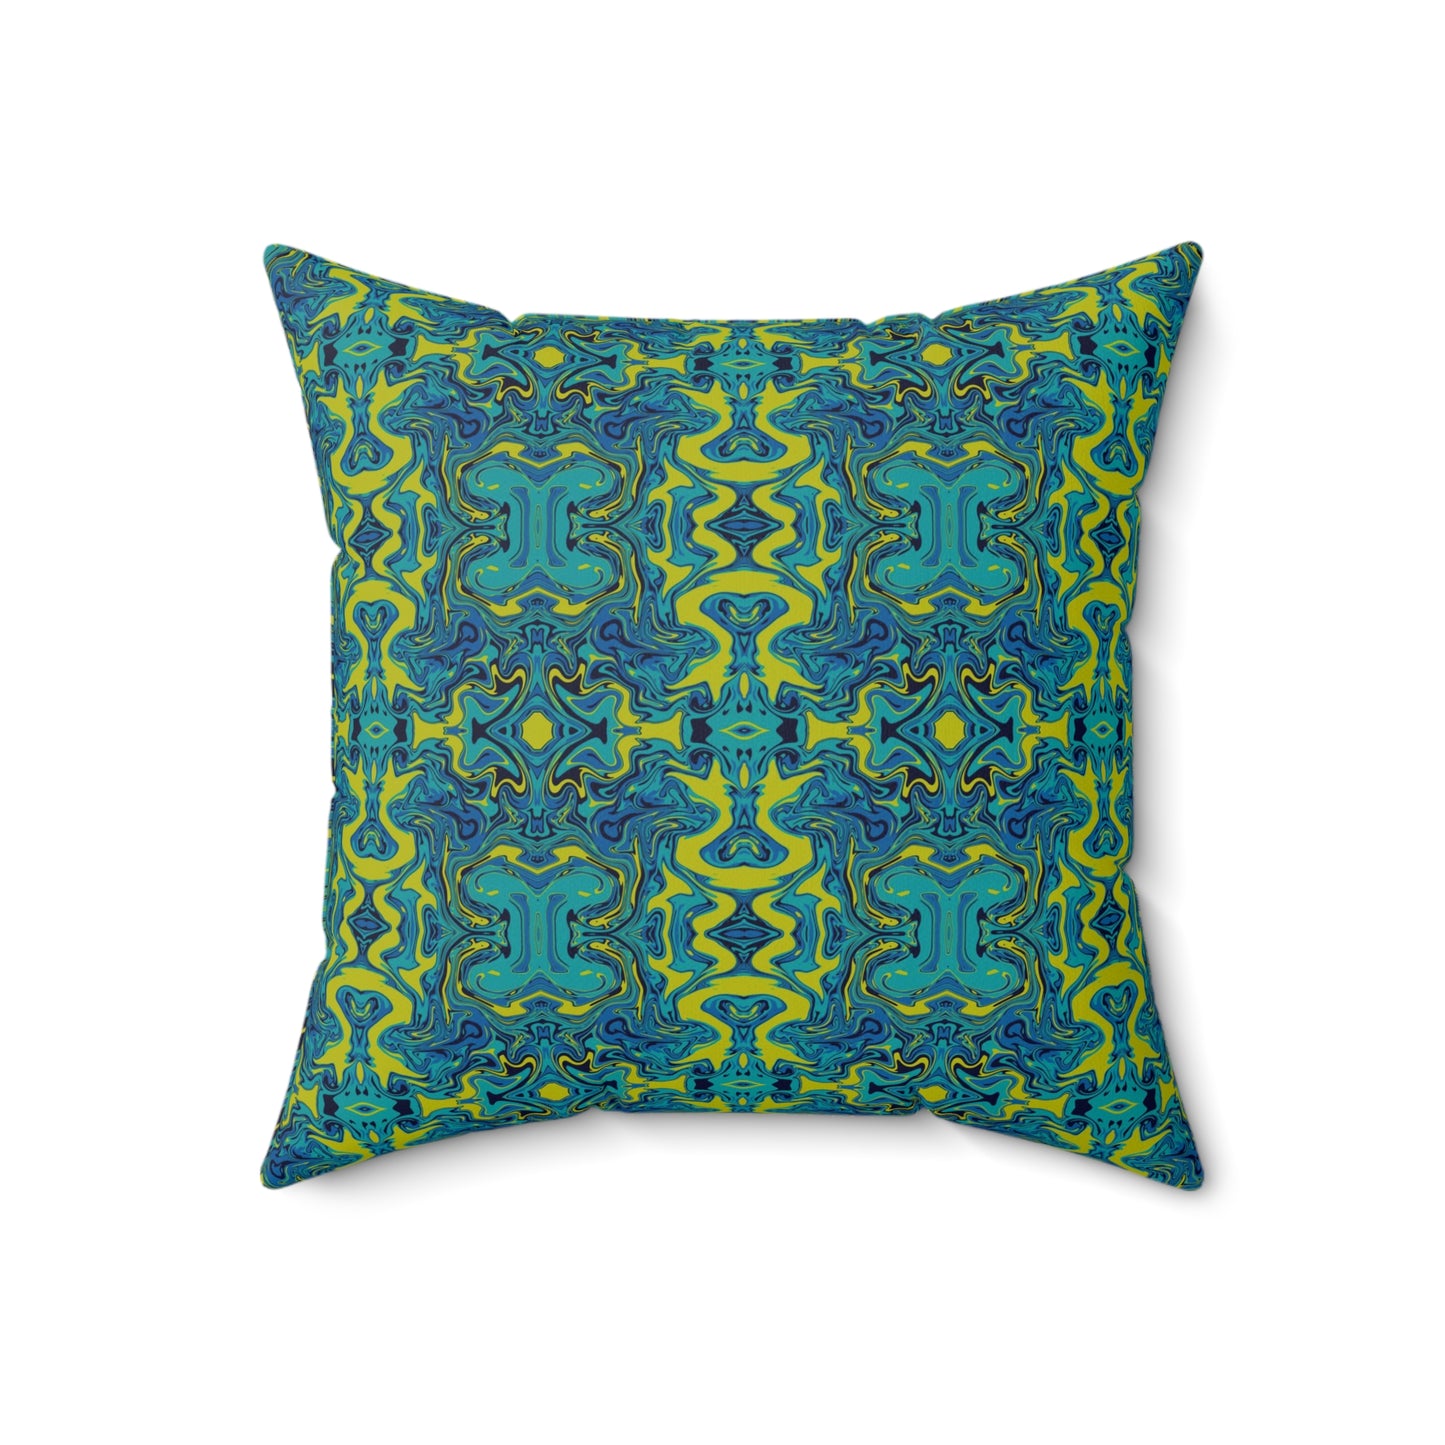 Boho Psychadelic Liquify in blue and green Spun Polyester Square Pillow